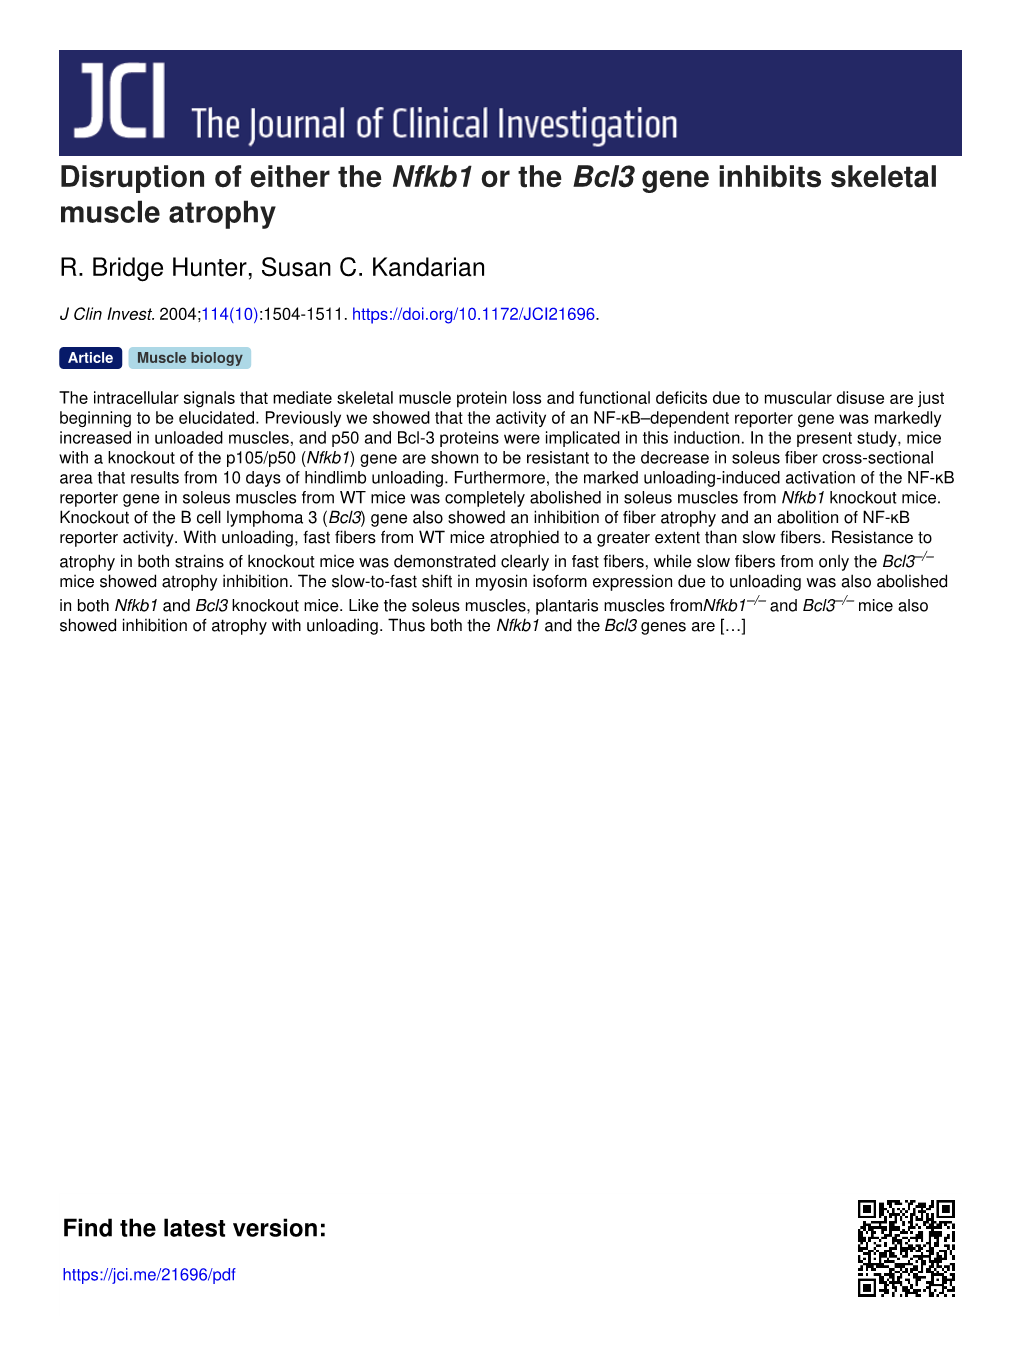 Disruption of Either the Nfkb1 Or the Bcl3 Gene Inhibits Skeletal Muscle Atrophy